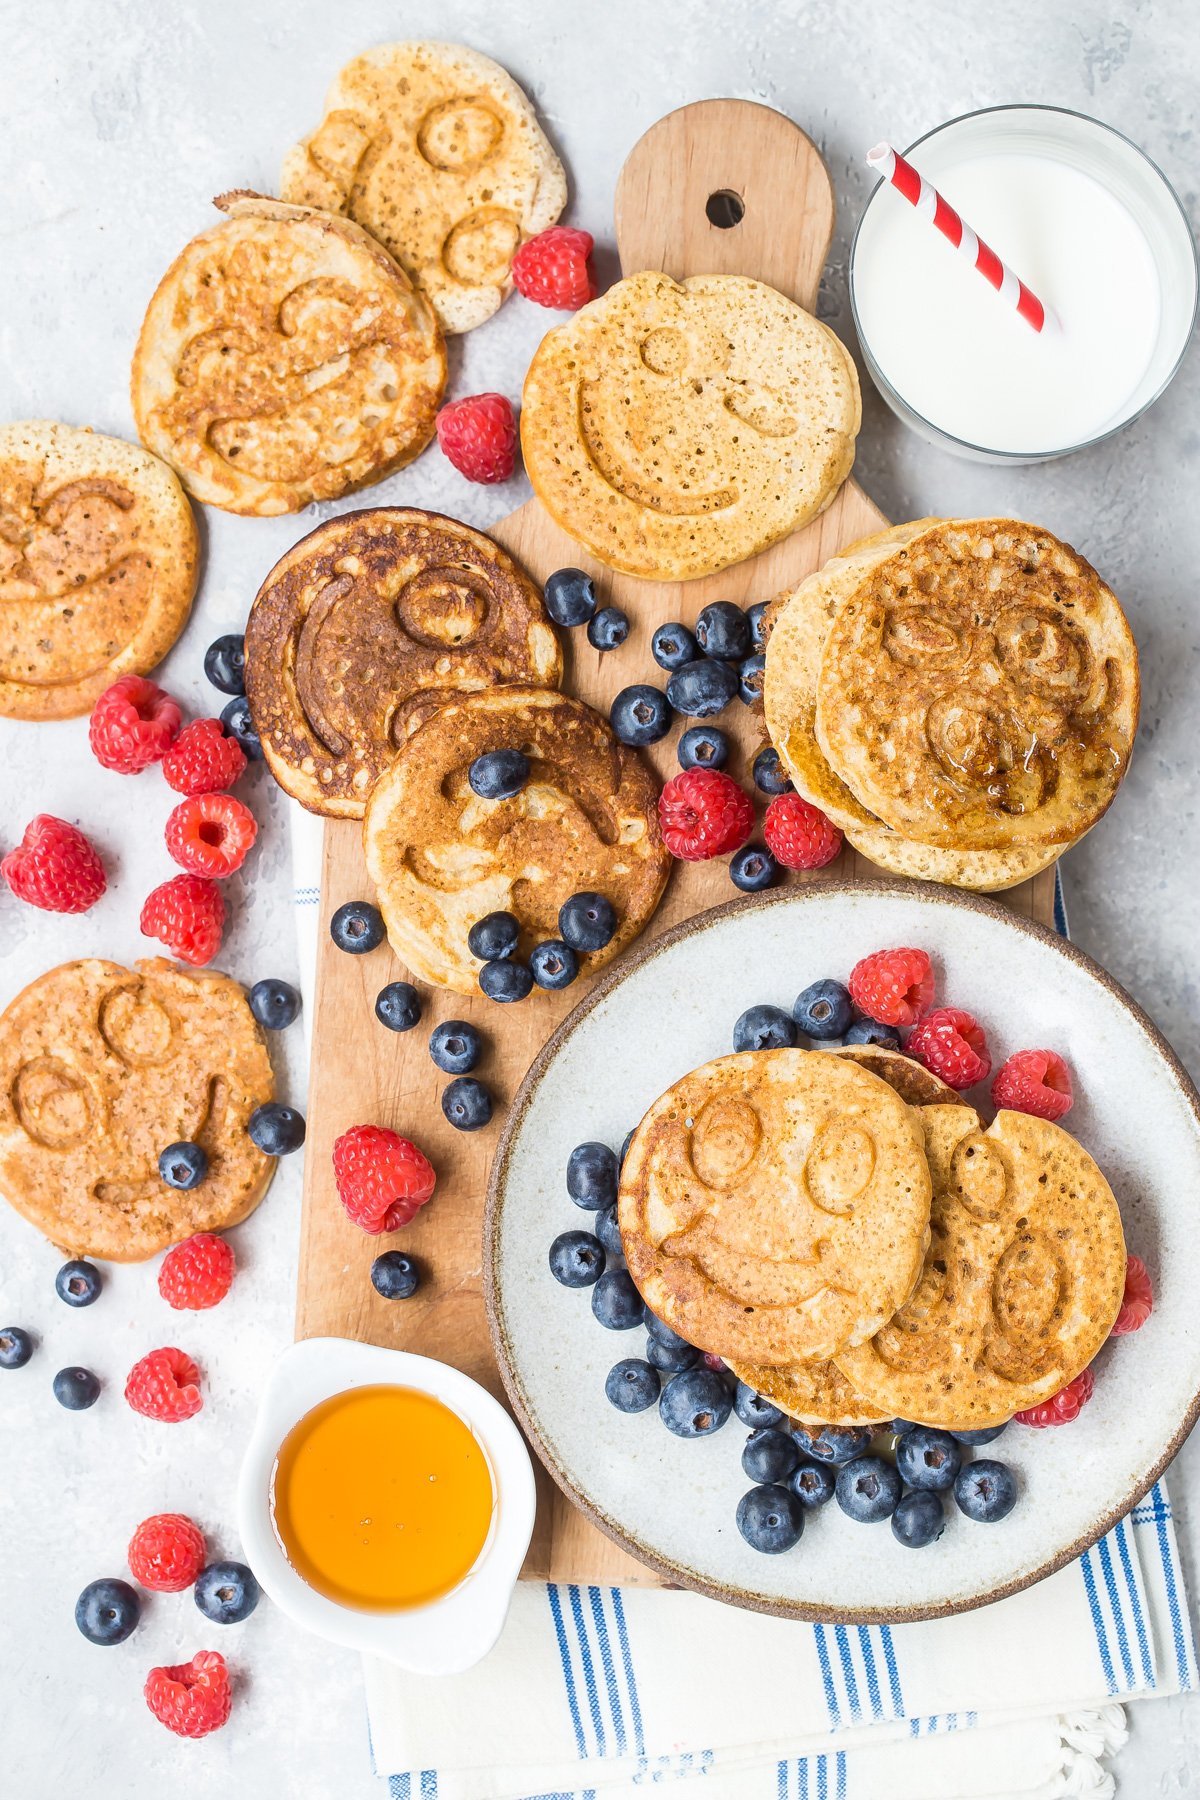 Quick oatmeal pancakes on serving platter surrounded by raspberries and blueberries.